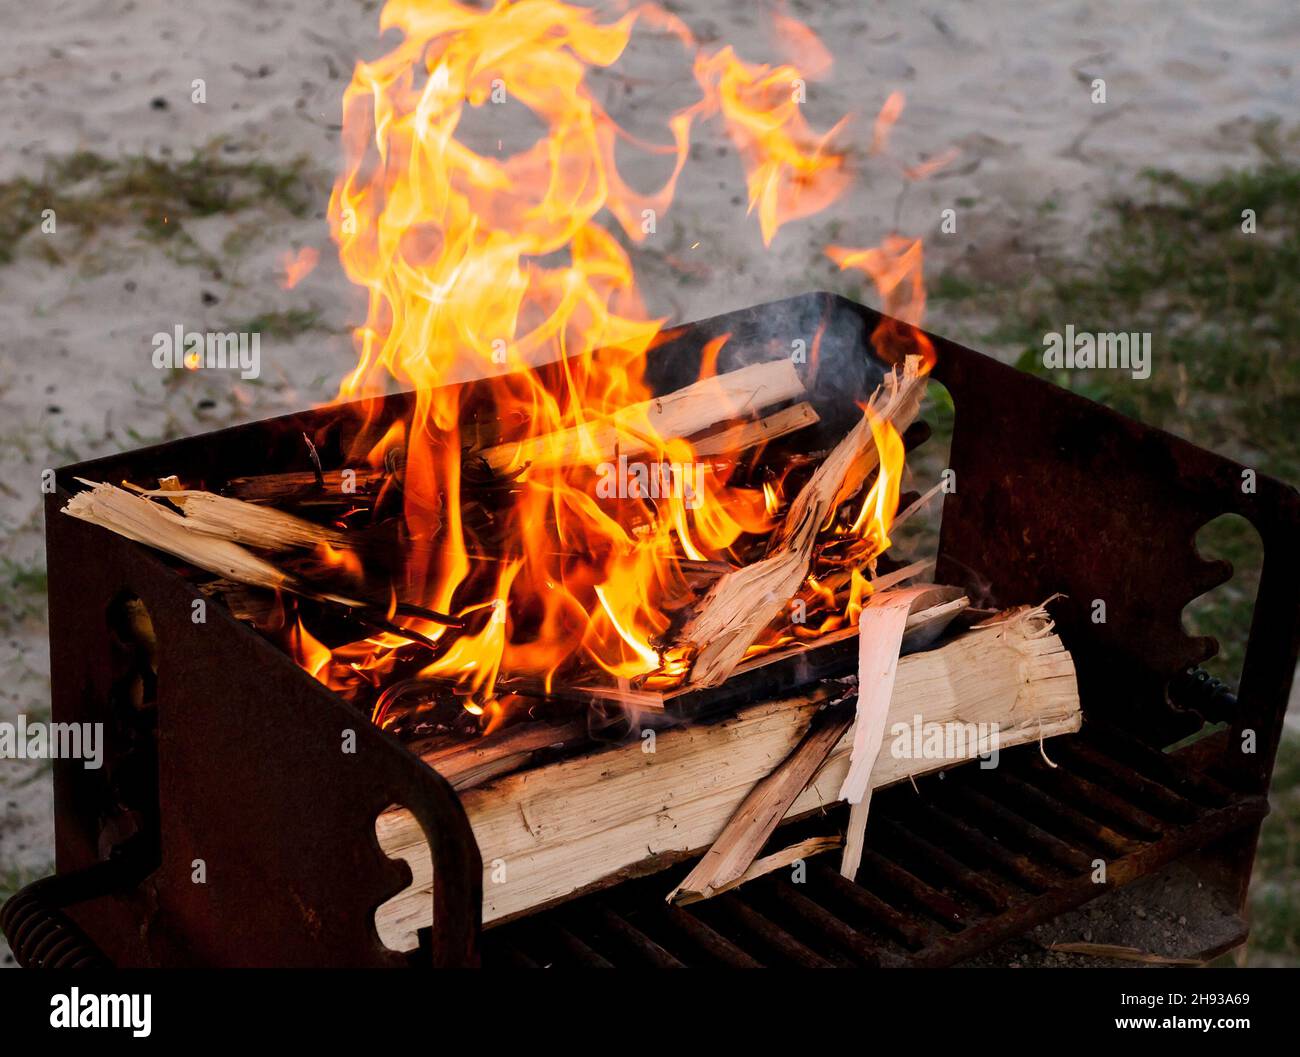 Wooden logs burning in a small fire built on a campsite grill Stock Photo